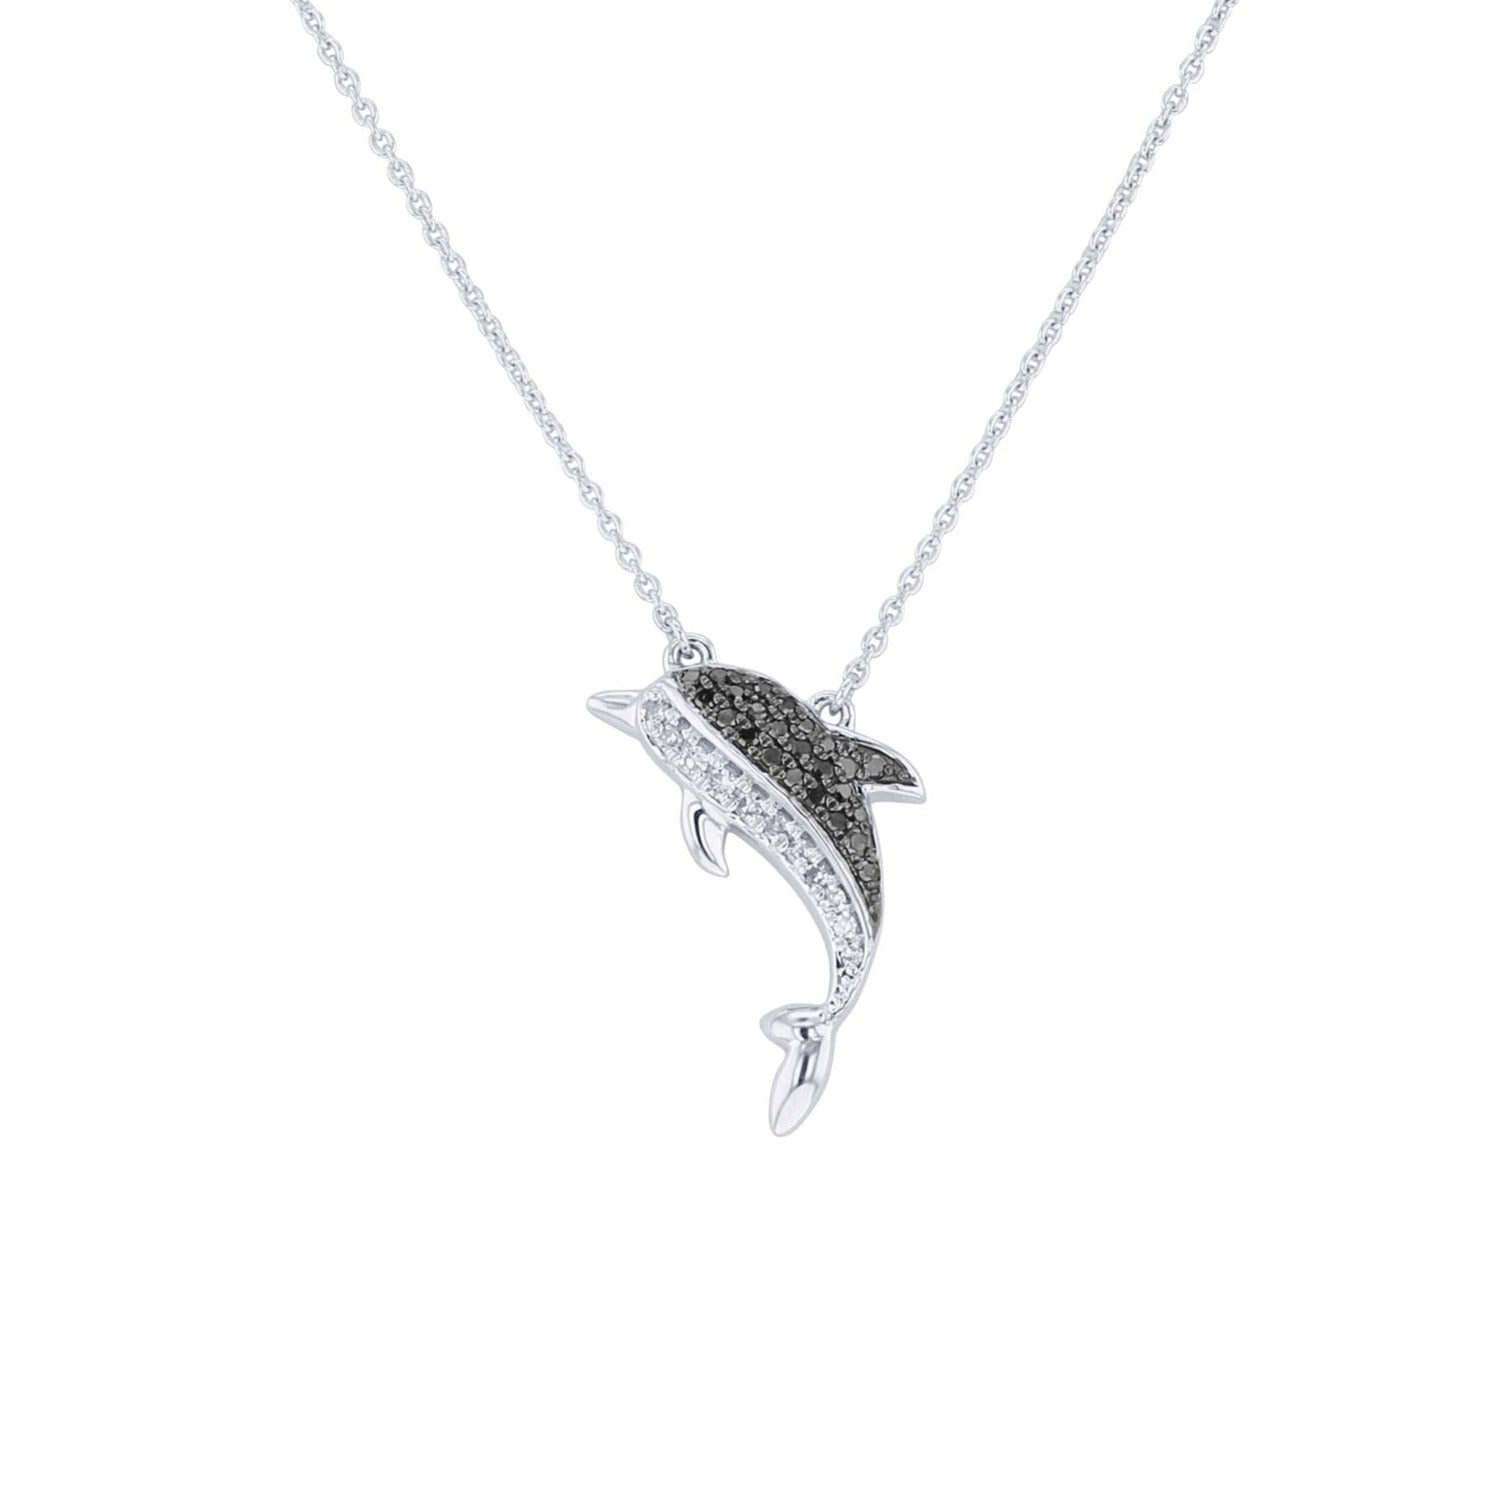 Silver Dolphin Black and White Diamond Necklace